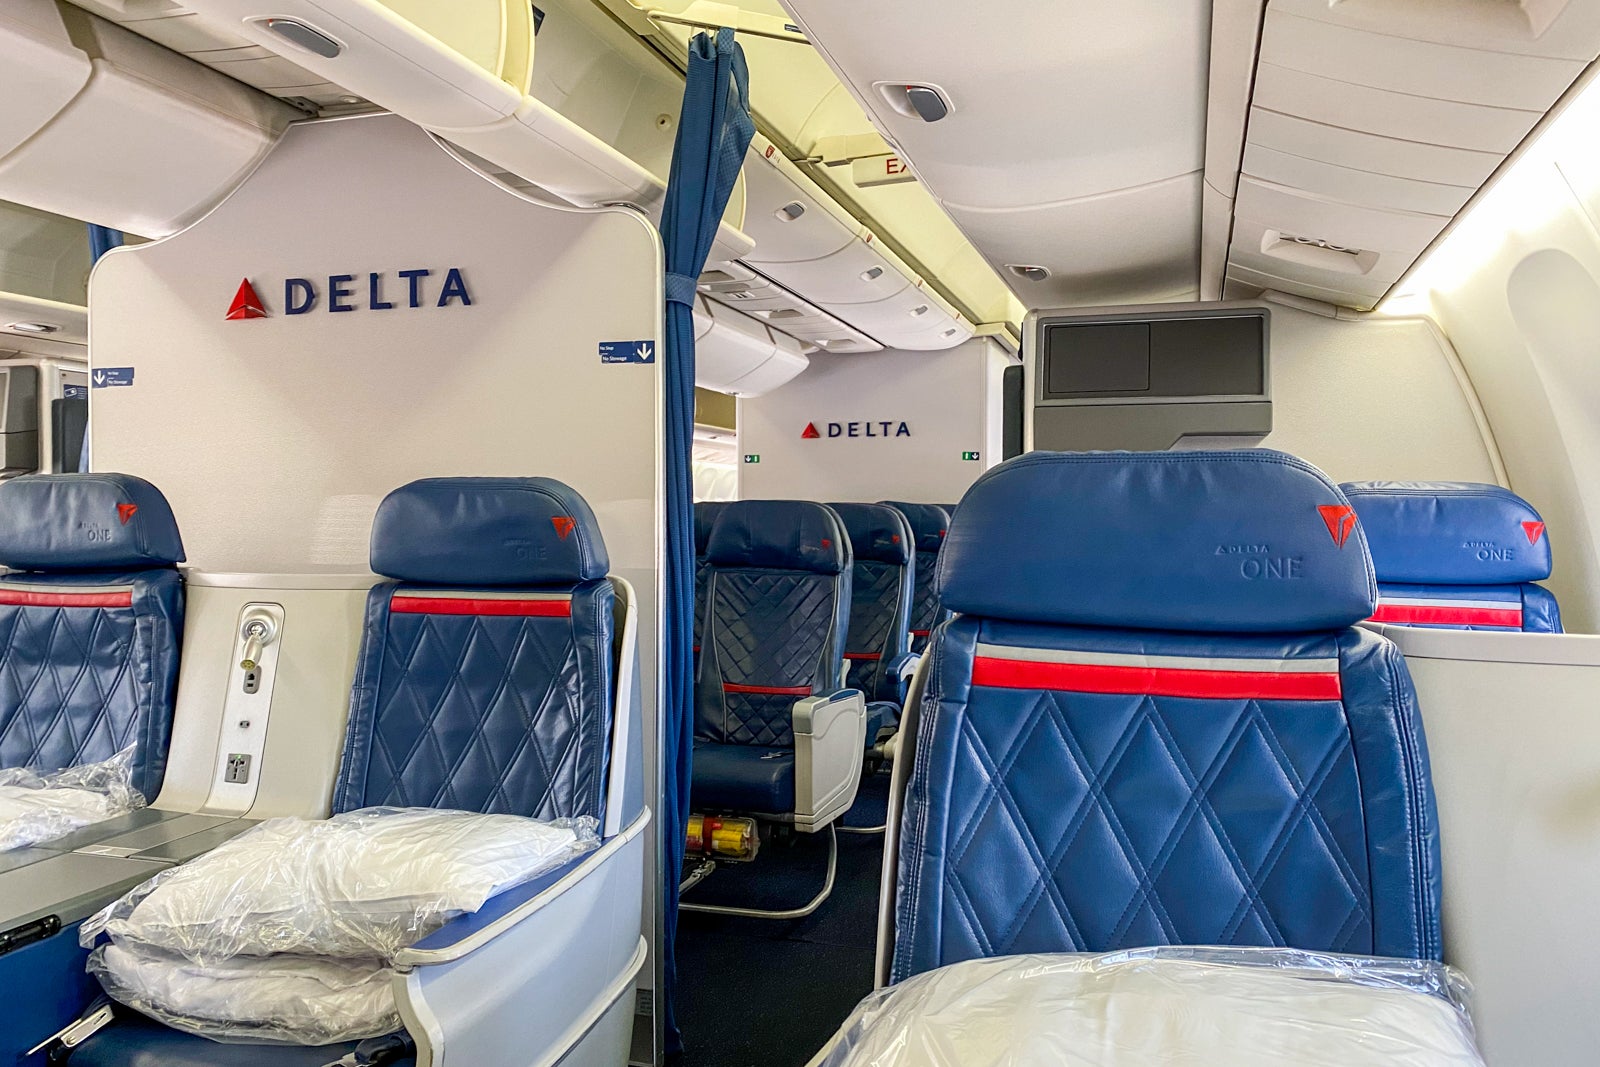 5 things I learned comparing the status of the American to the Delta during the pandemic